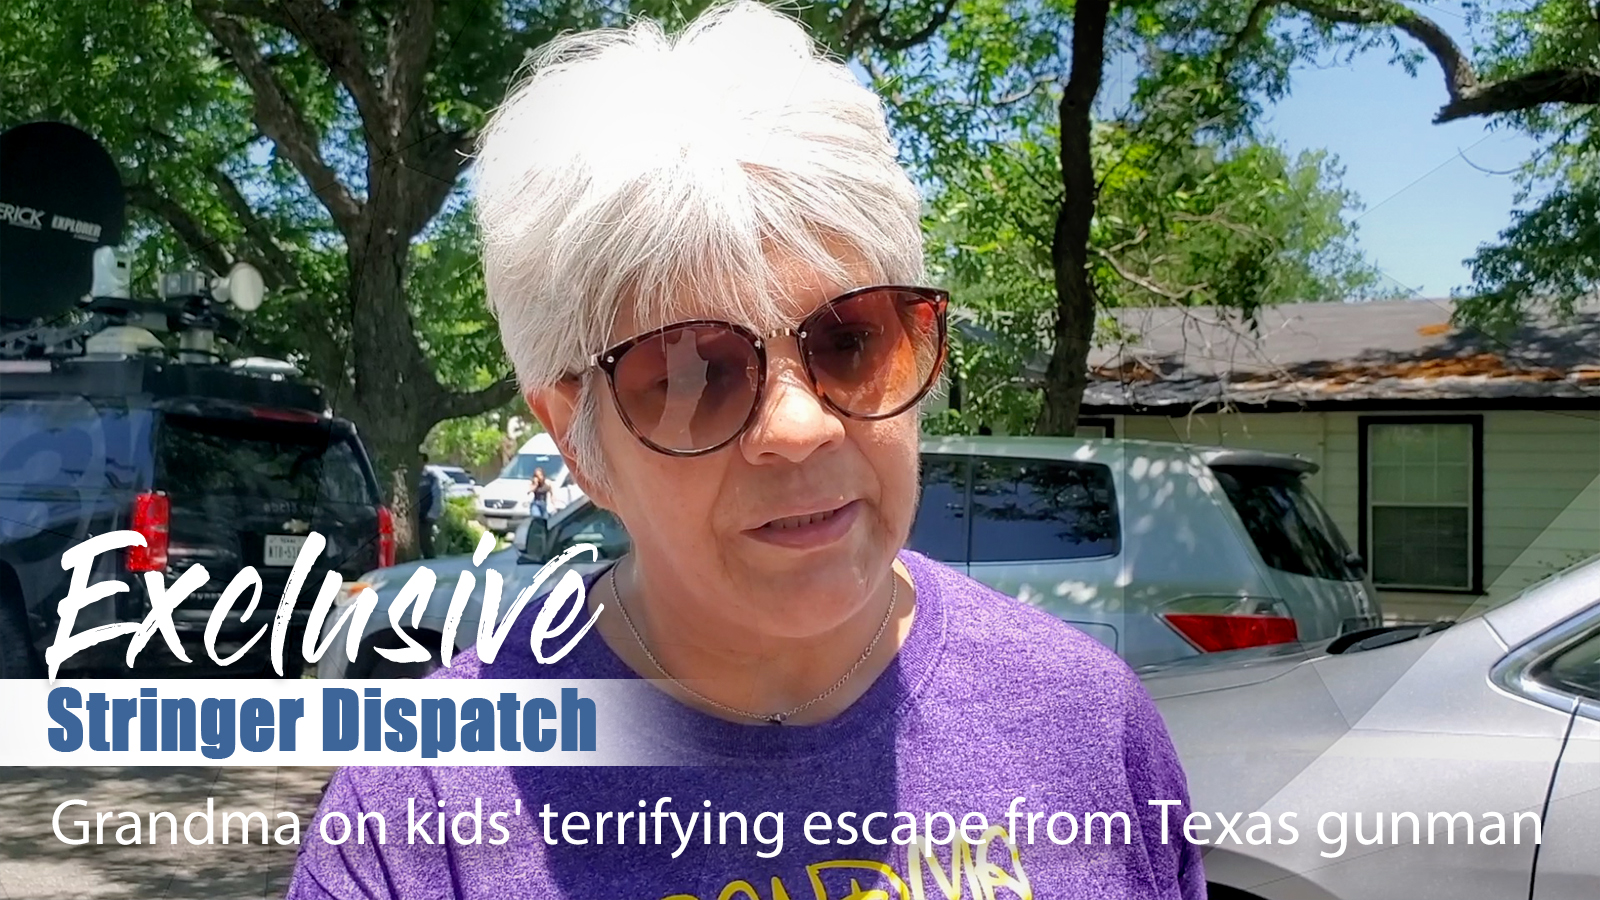 Exclusive Stringer Dispatch: Grandma on kids' terrifying escape from Texas gunman